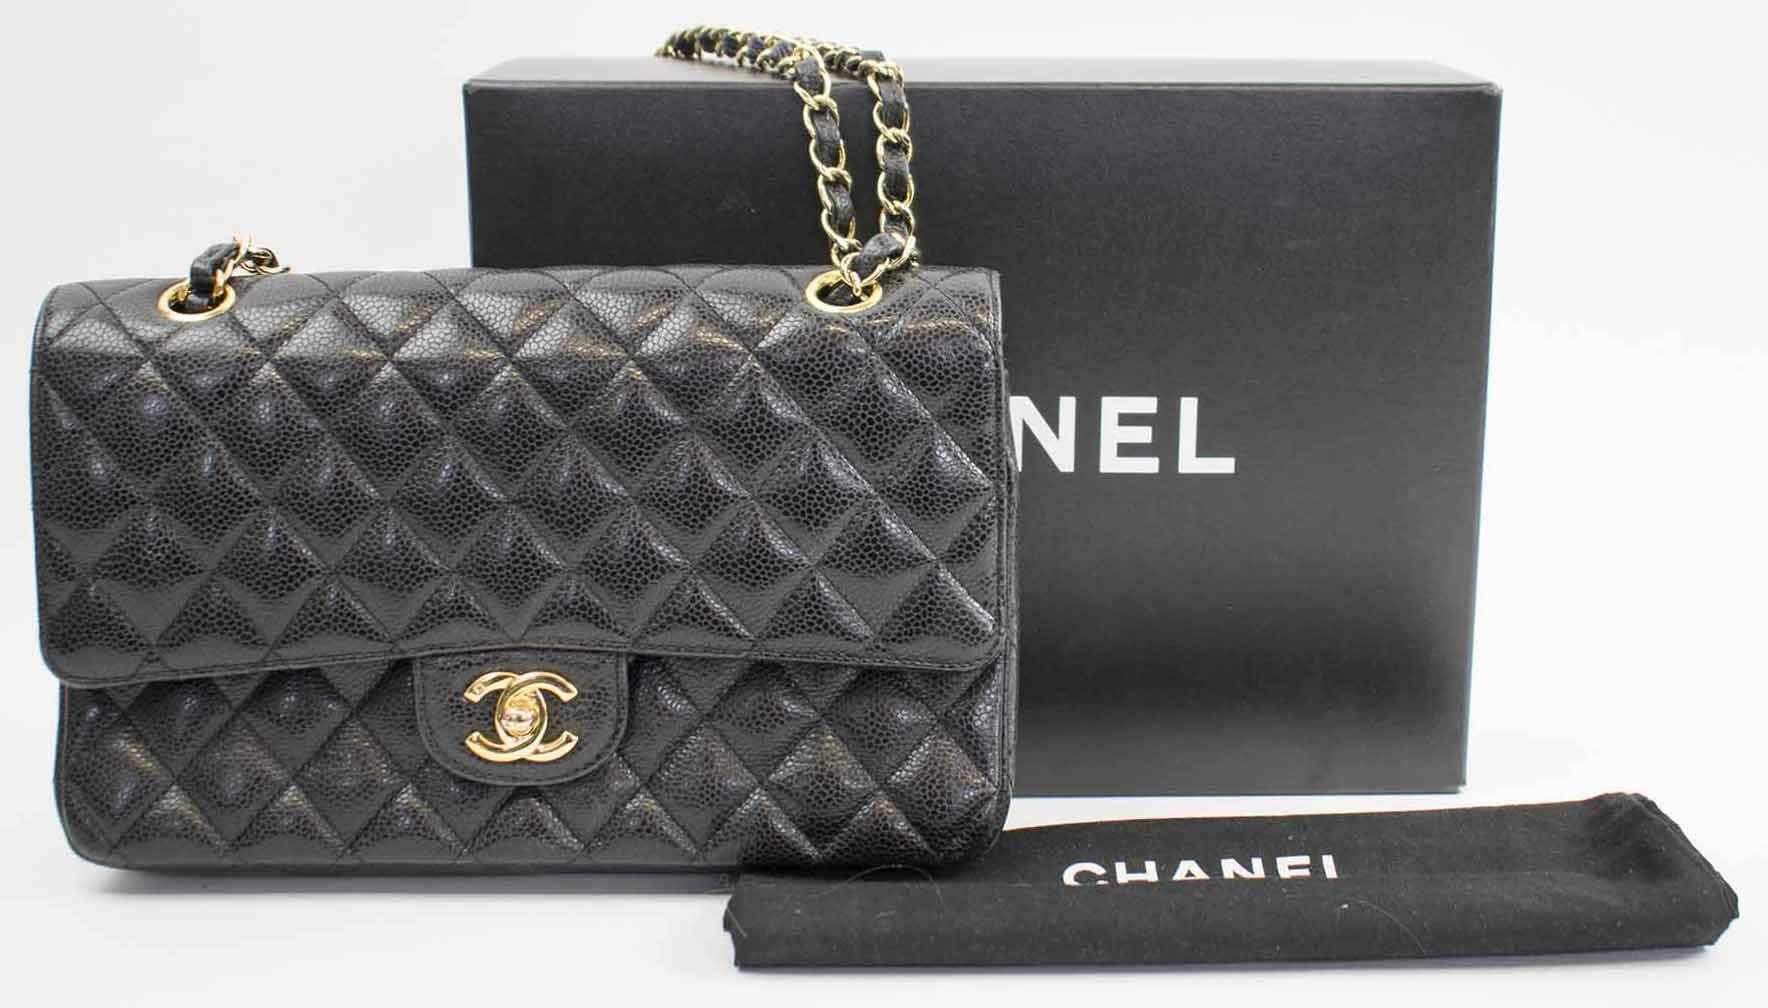 Download CHANEL CLASSIC FLAP BAG, black caviar leather with front ...